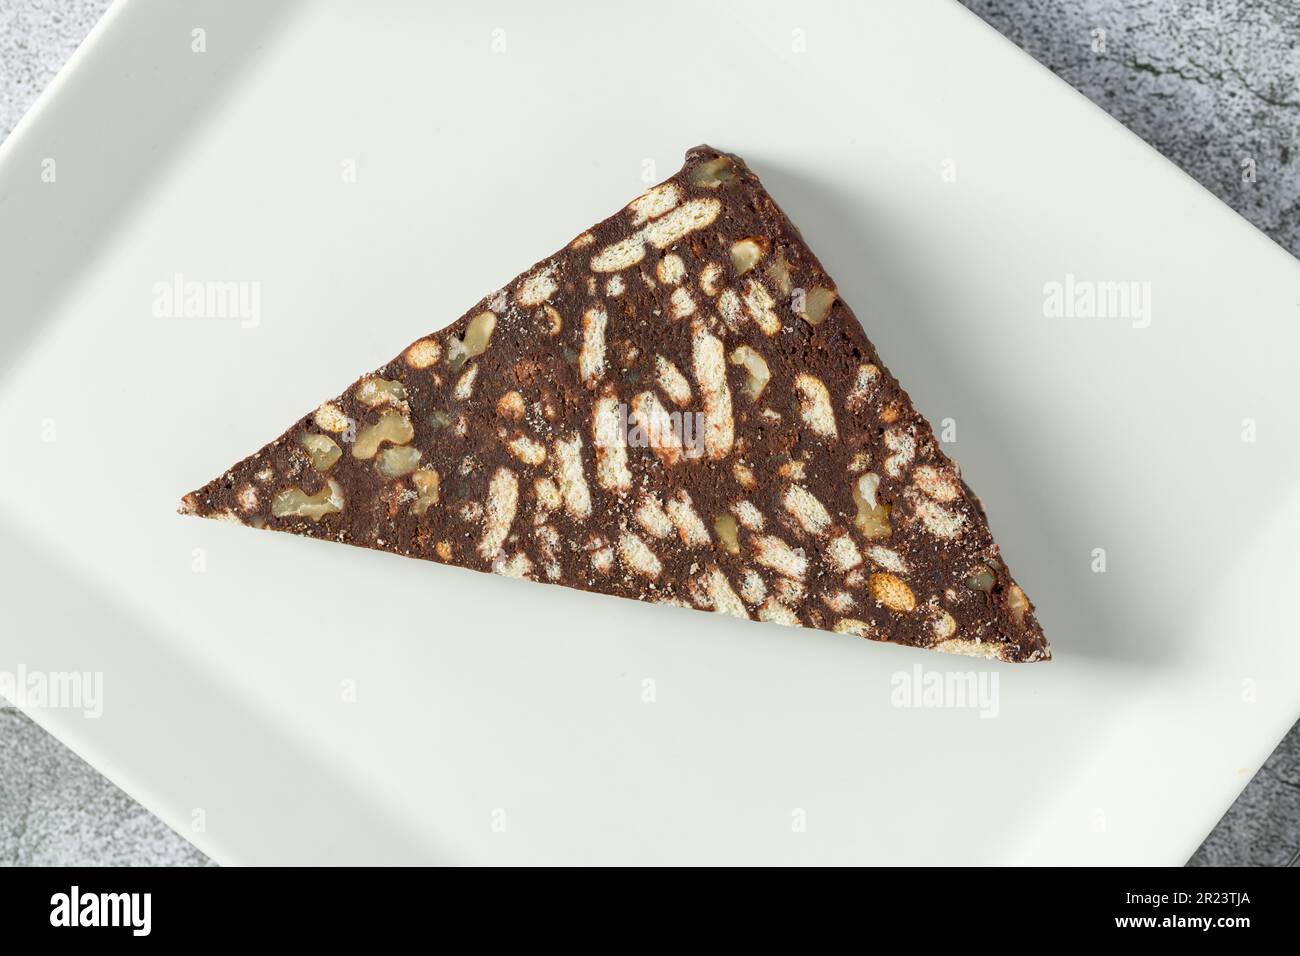 Chocolate mosaic cake with walnuts on a white porcelain plate on a stone background Stock Photo